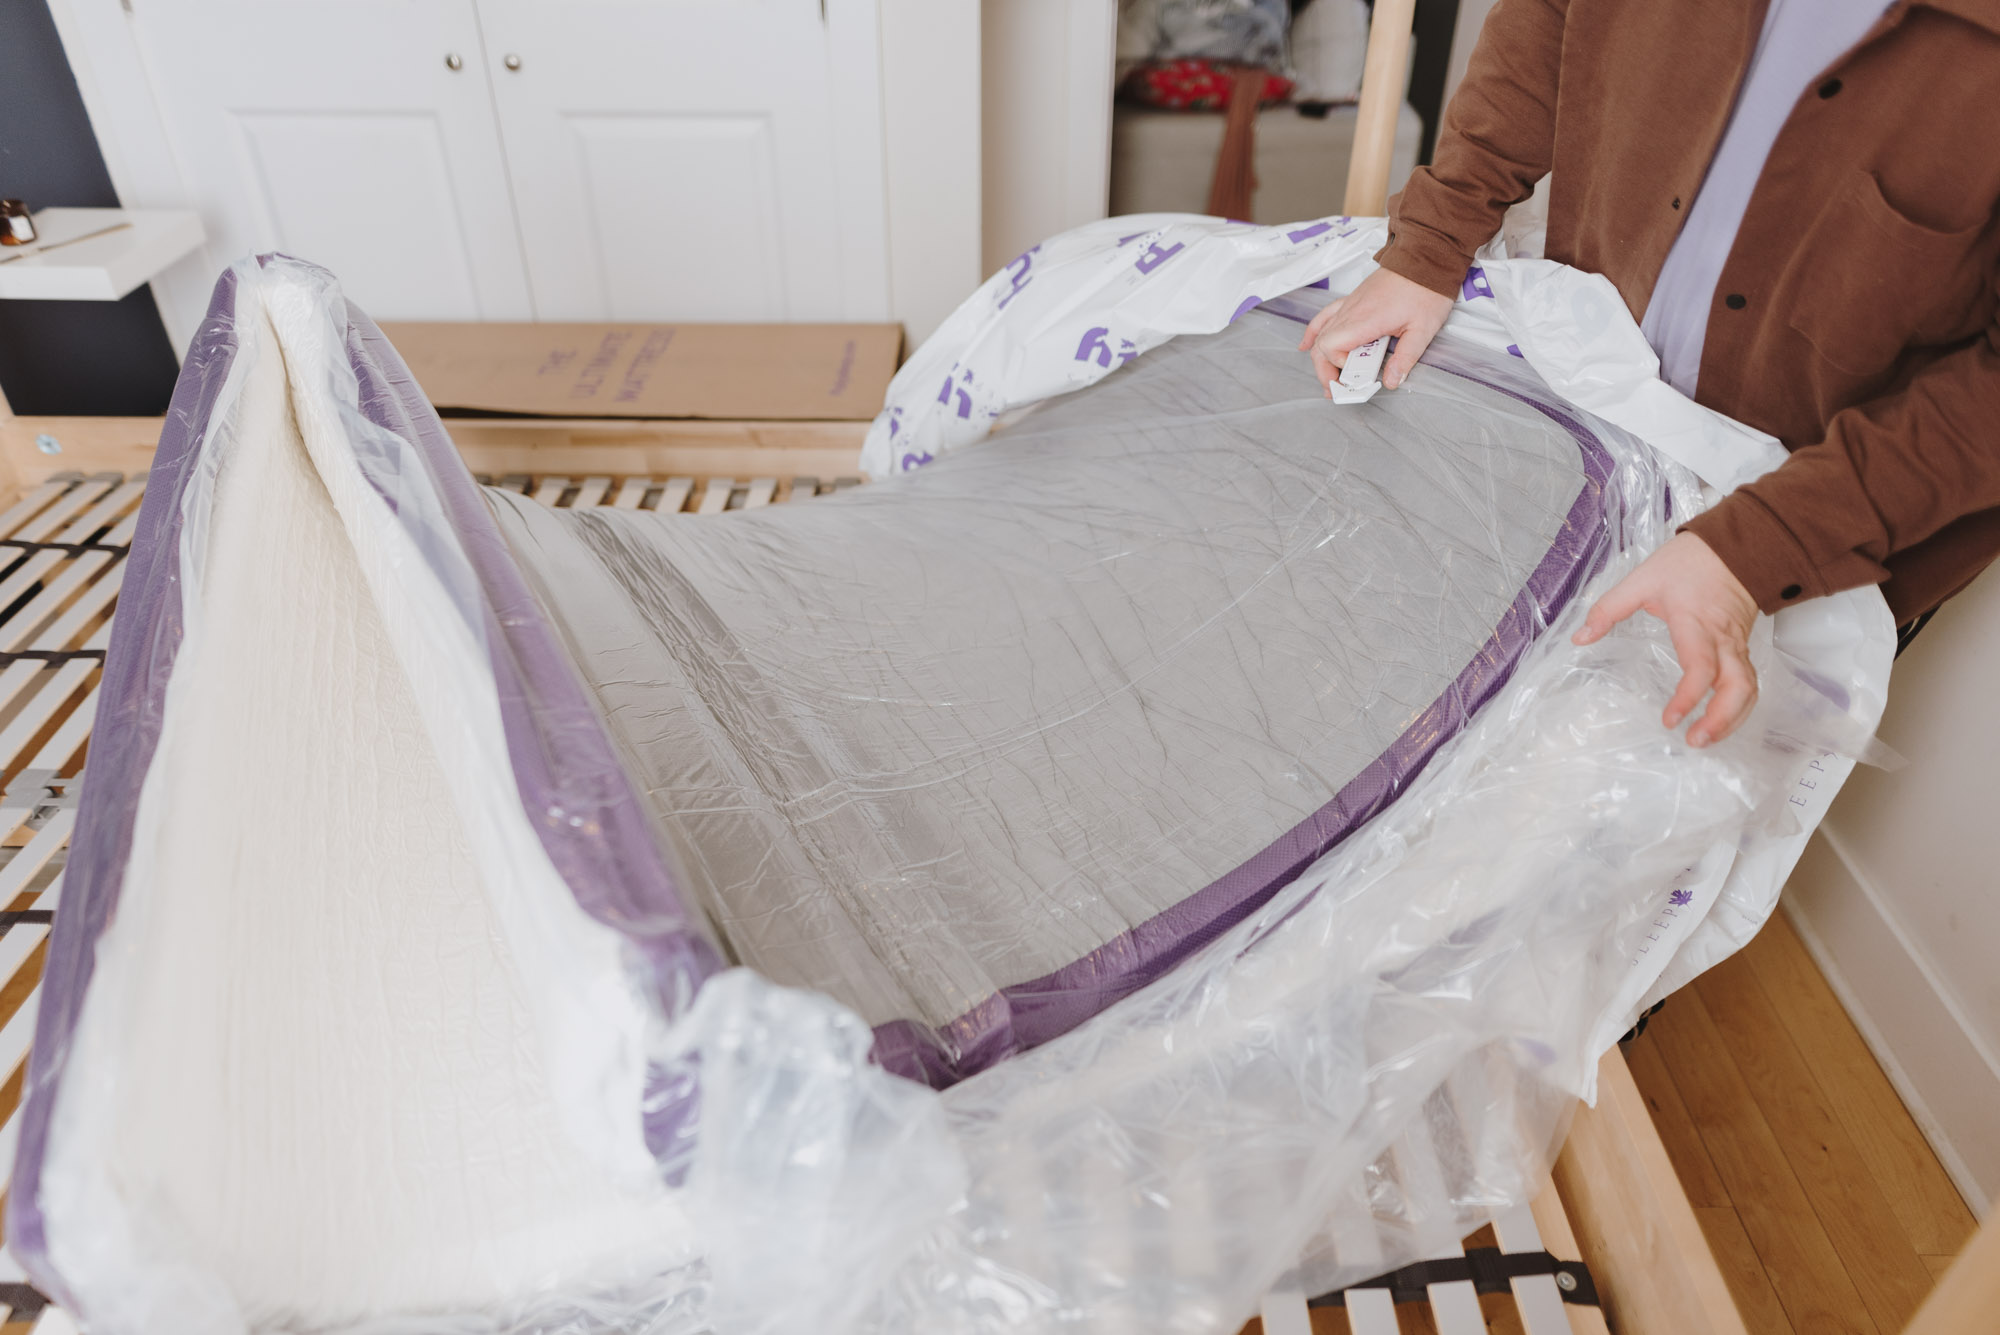 Polysleep Mattress — Jeff On The Road — All photos are under Copyright  © 2019 Jeff Frenette Photography / dezjeff. To use the photos, please contact me at dezjeff@me.com.